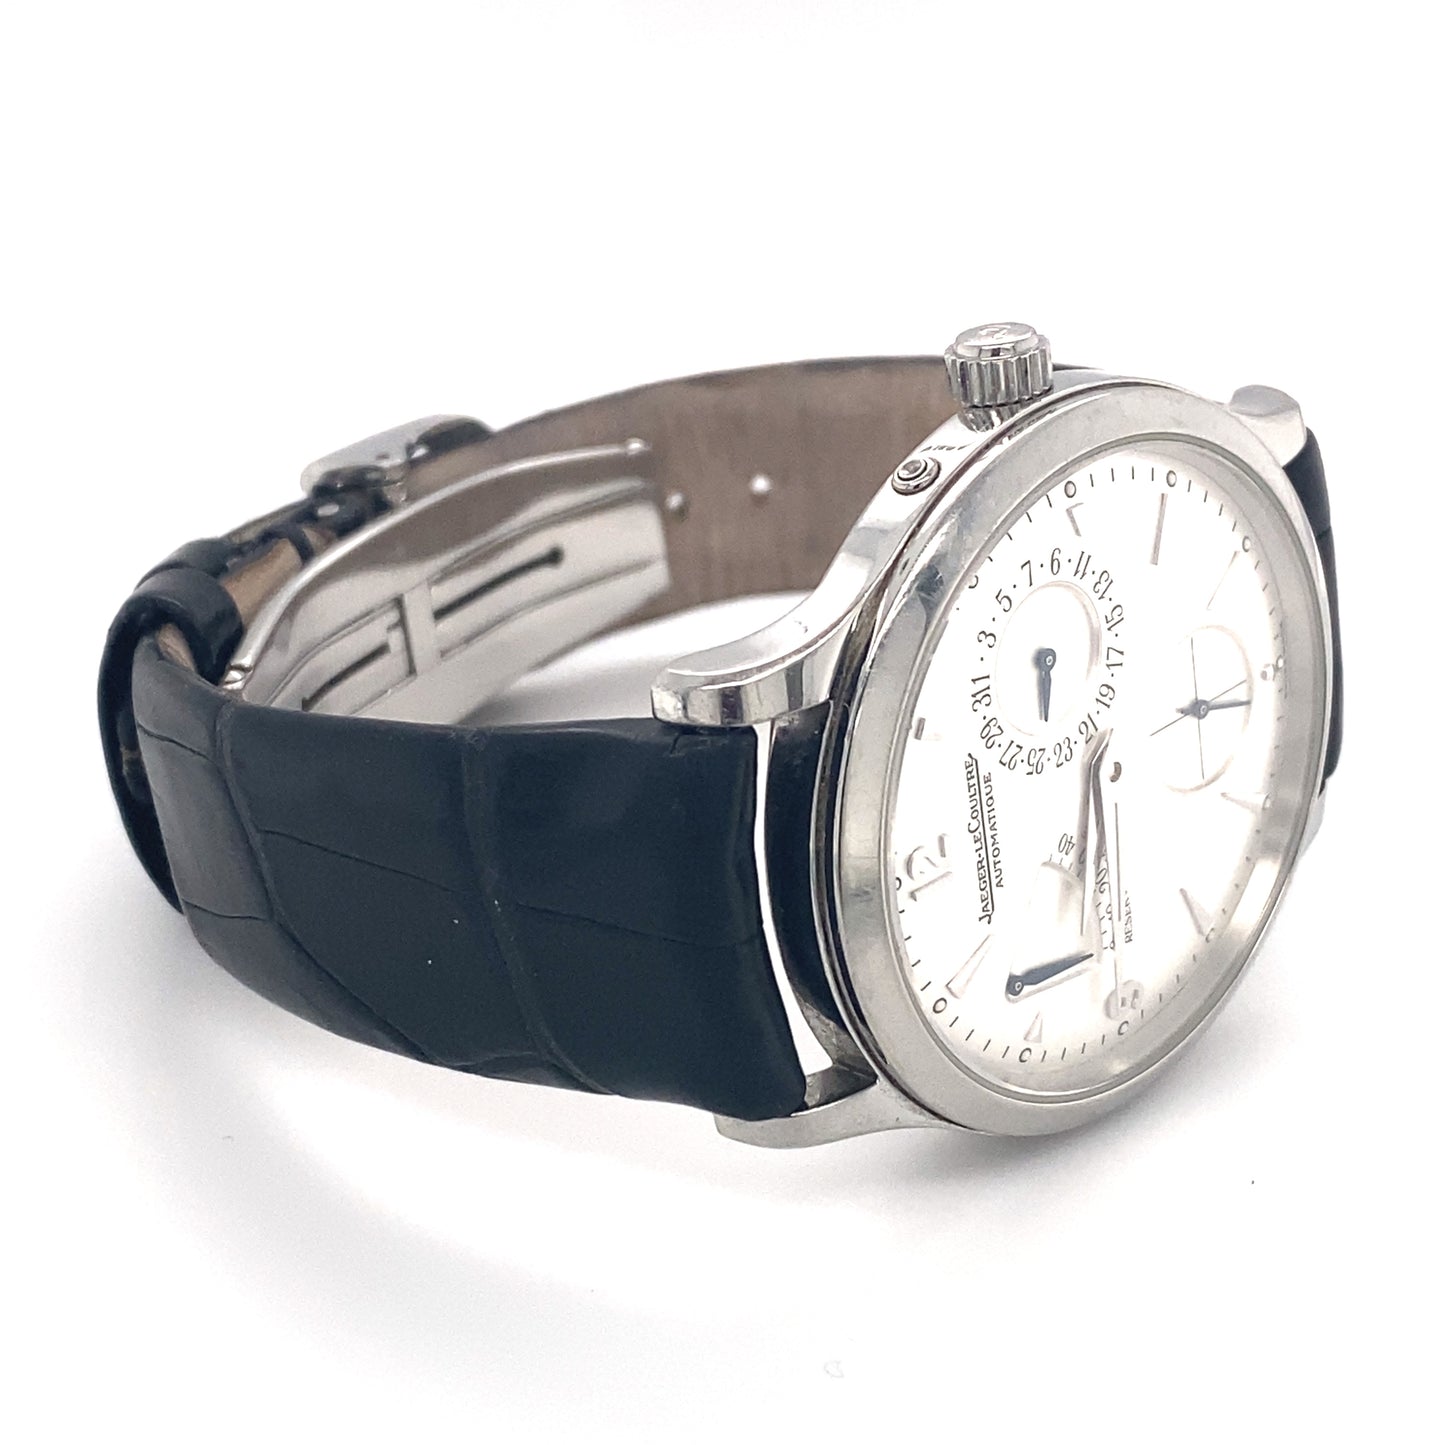 Jaeger-LeCoultre Master Ultra Thin 39mm Case Mens' Wristwatch